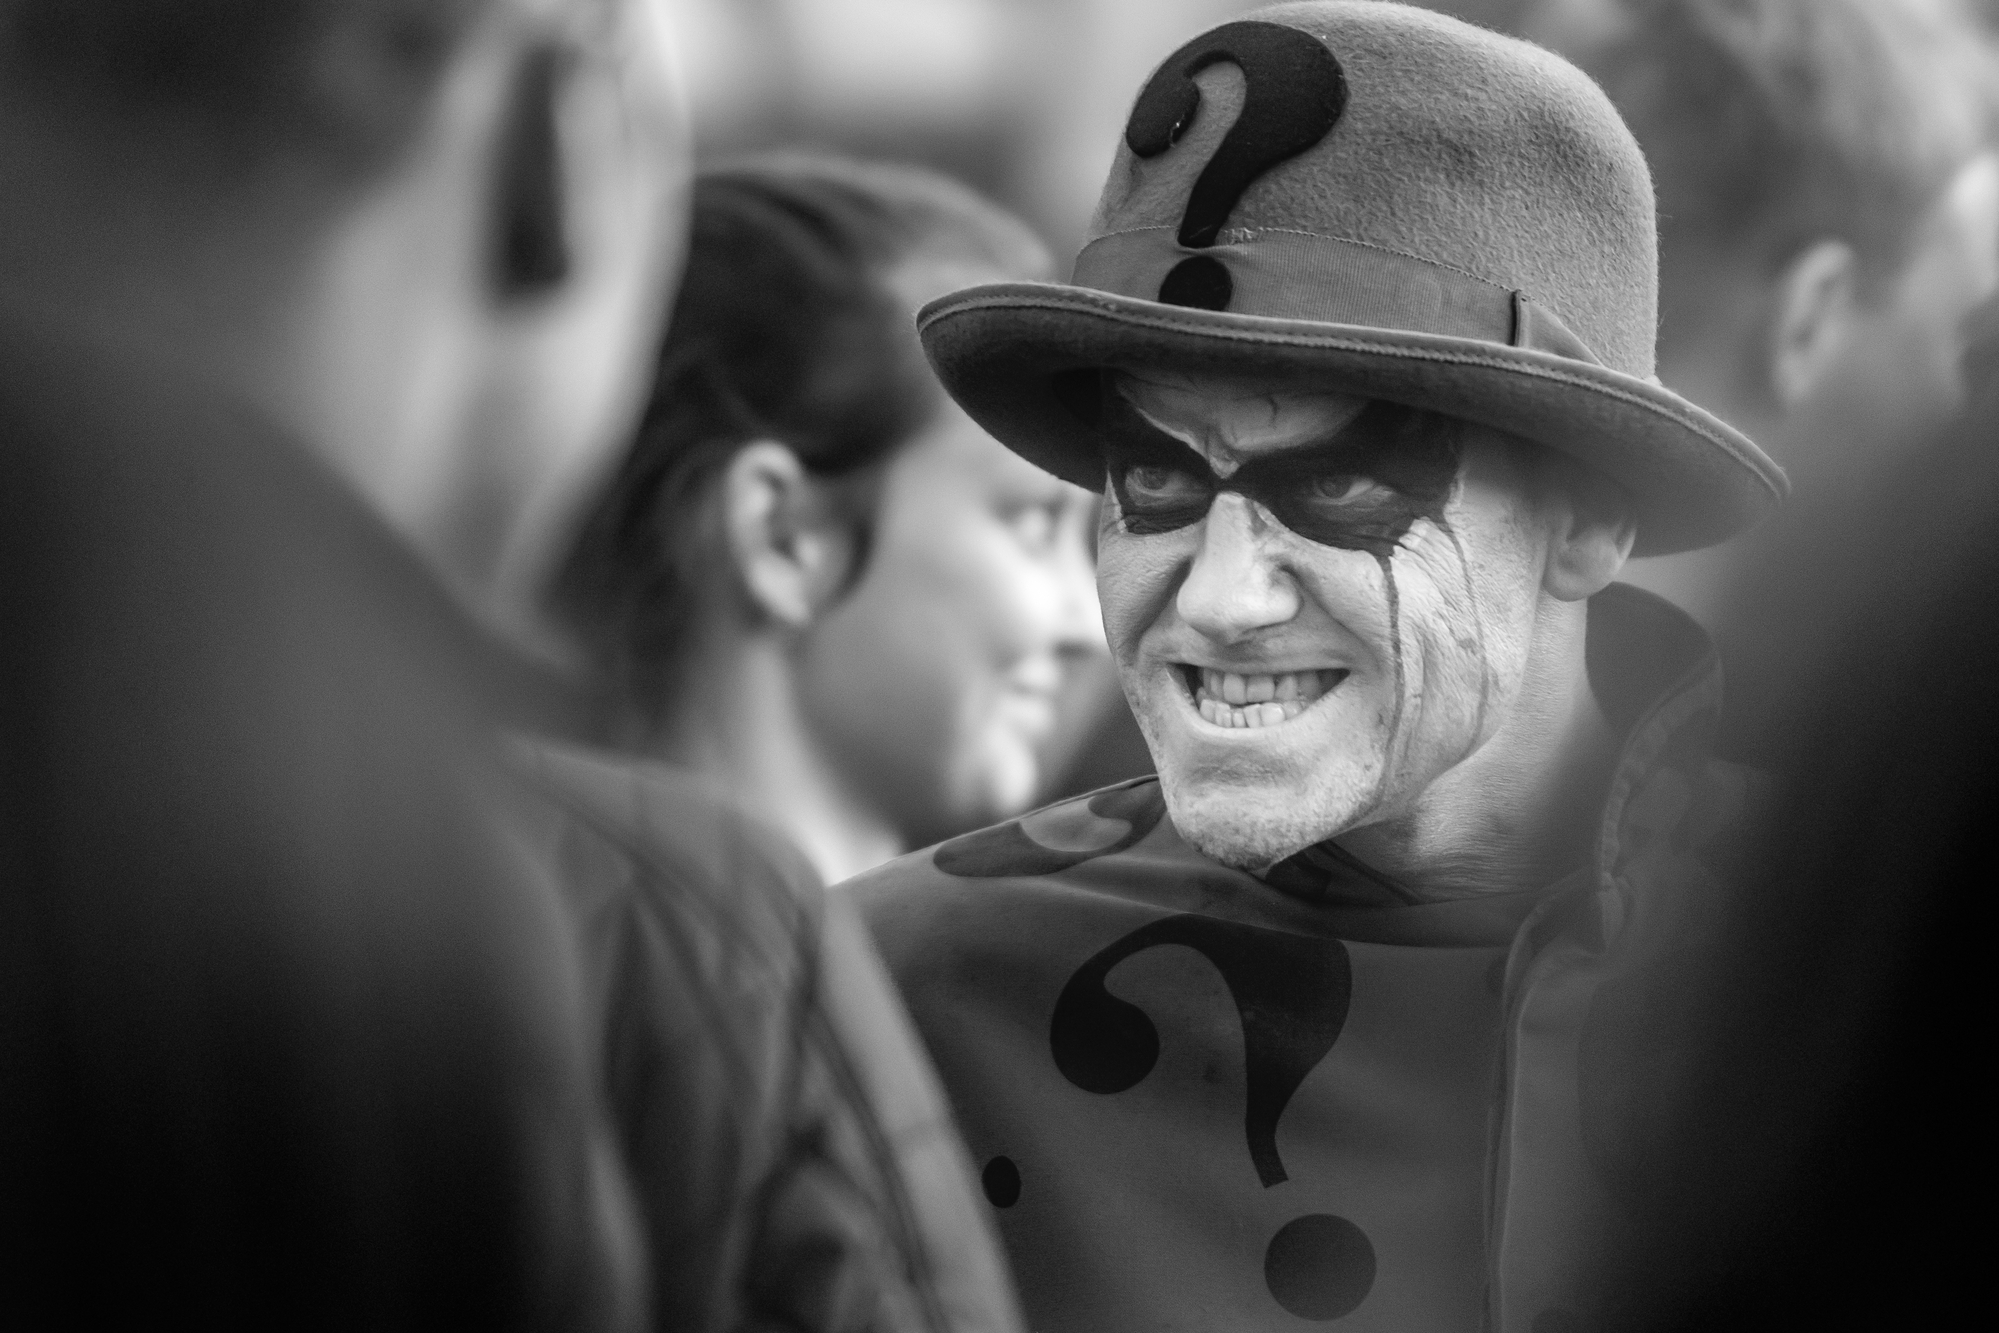 Infamous Riddler of DC Comics grins under bowler hat with large question mark in front.